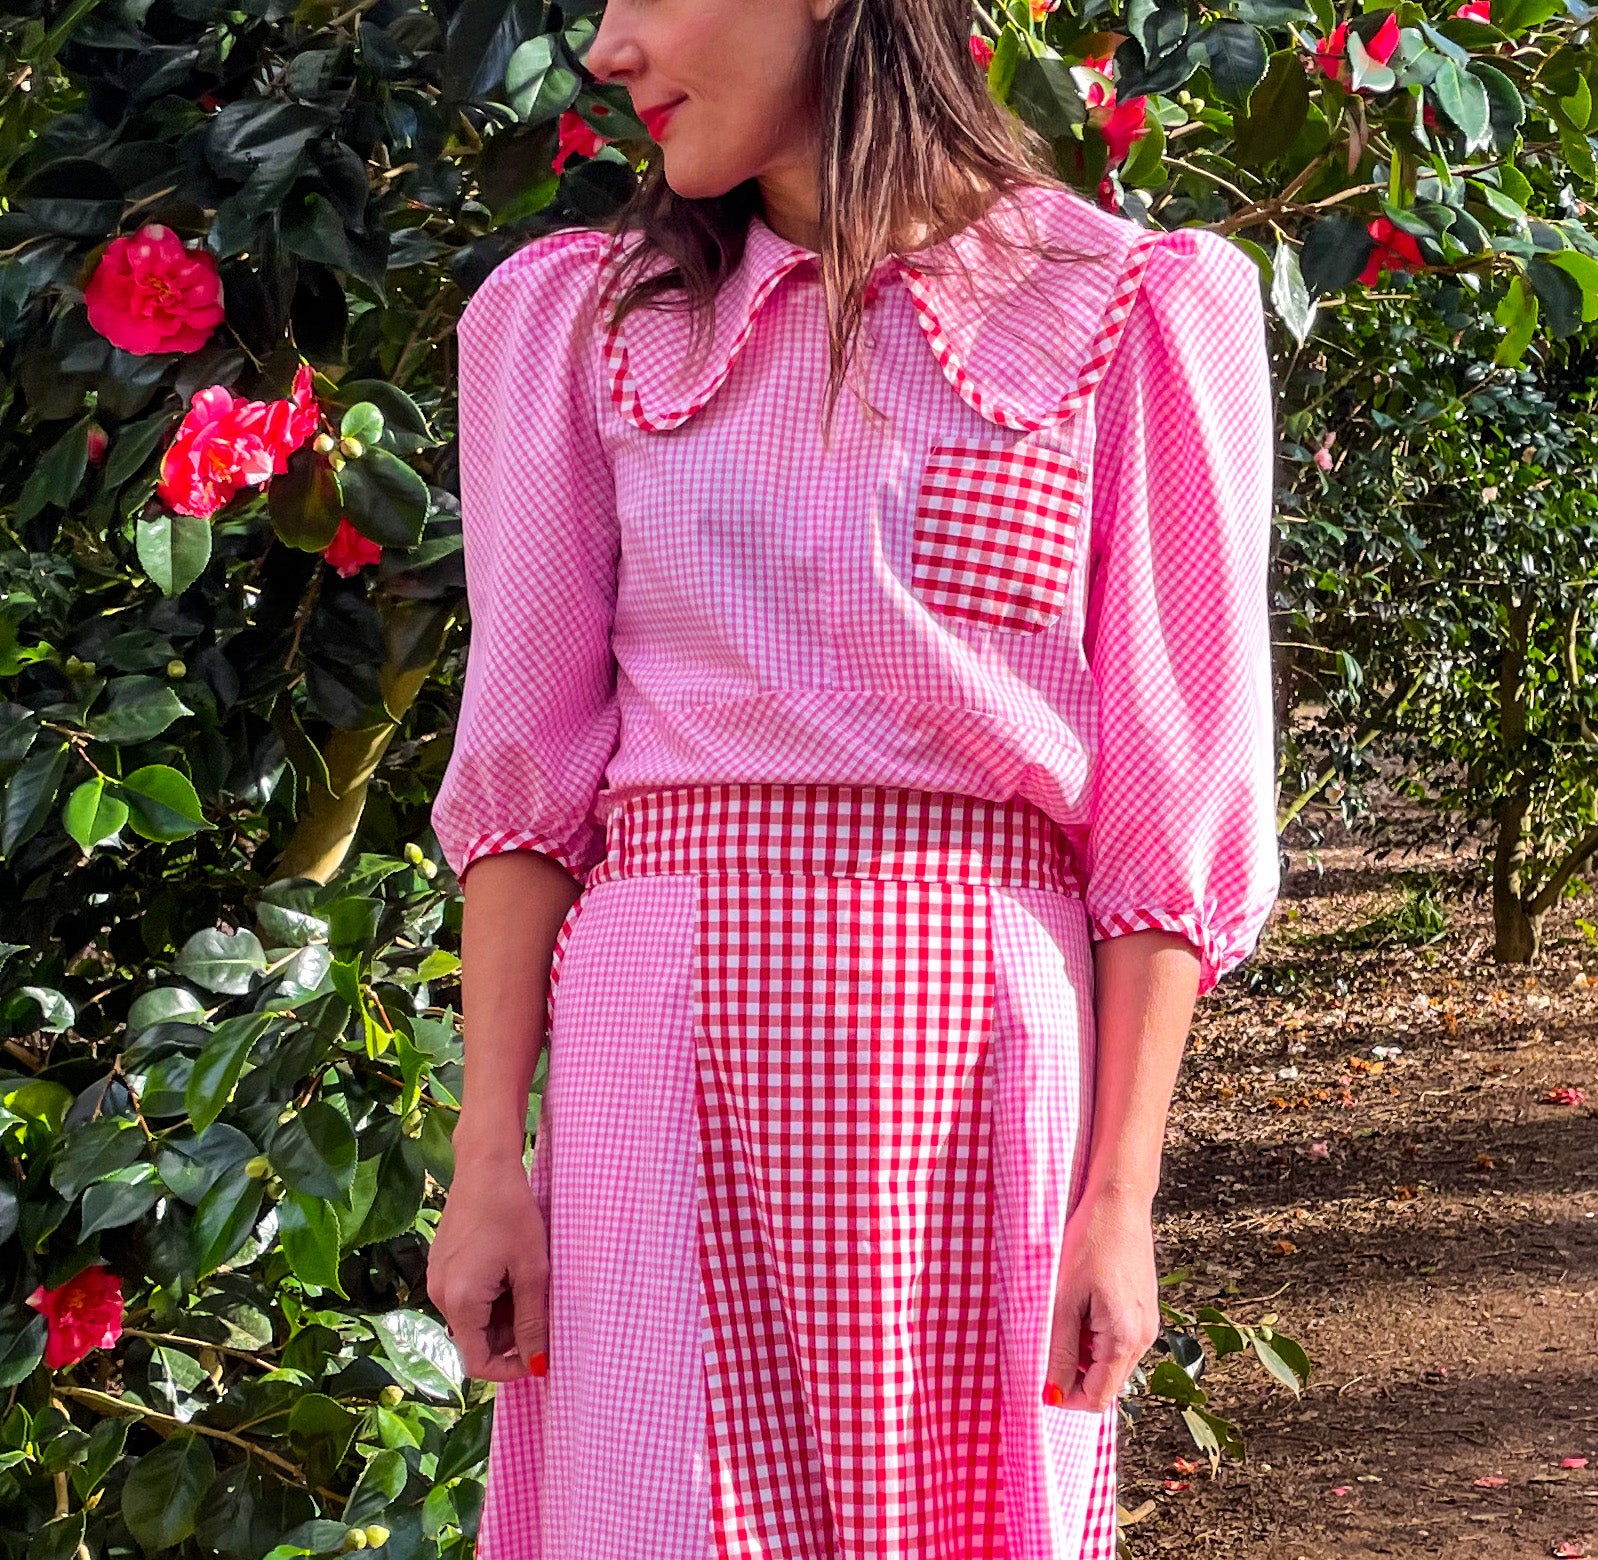 The 'Picnic' blouse – Dana and the Red Shoes